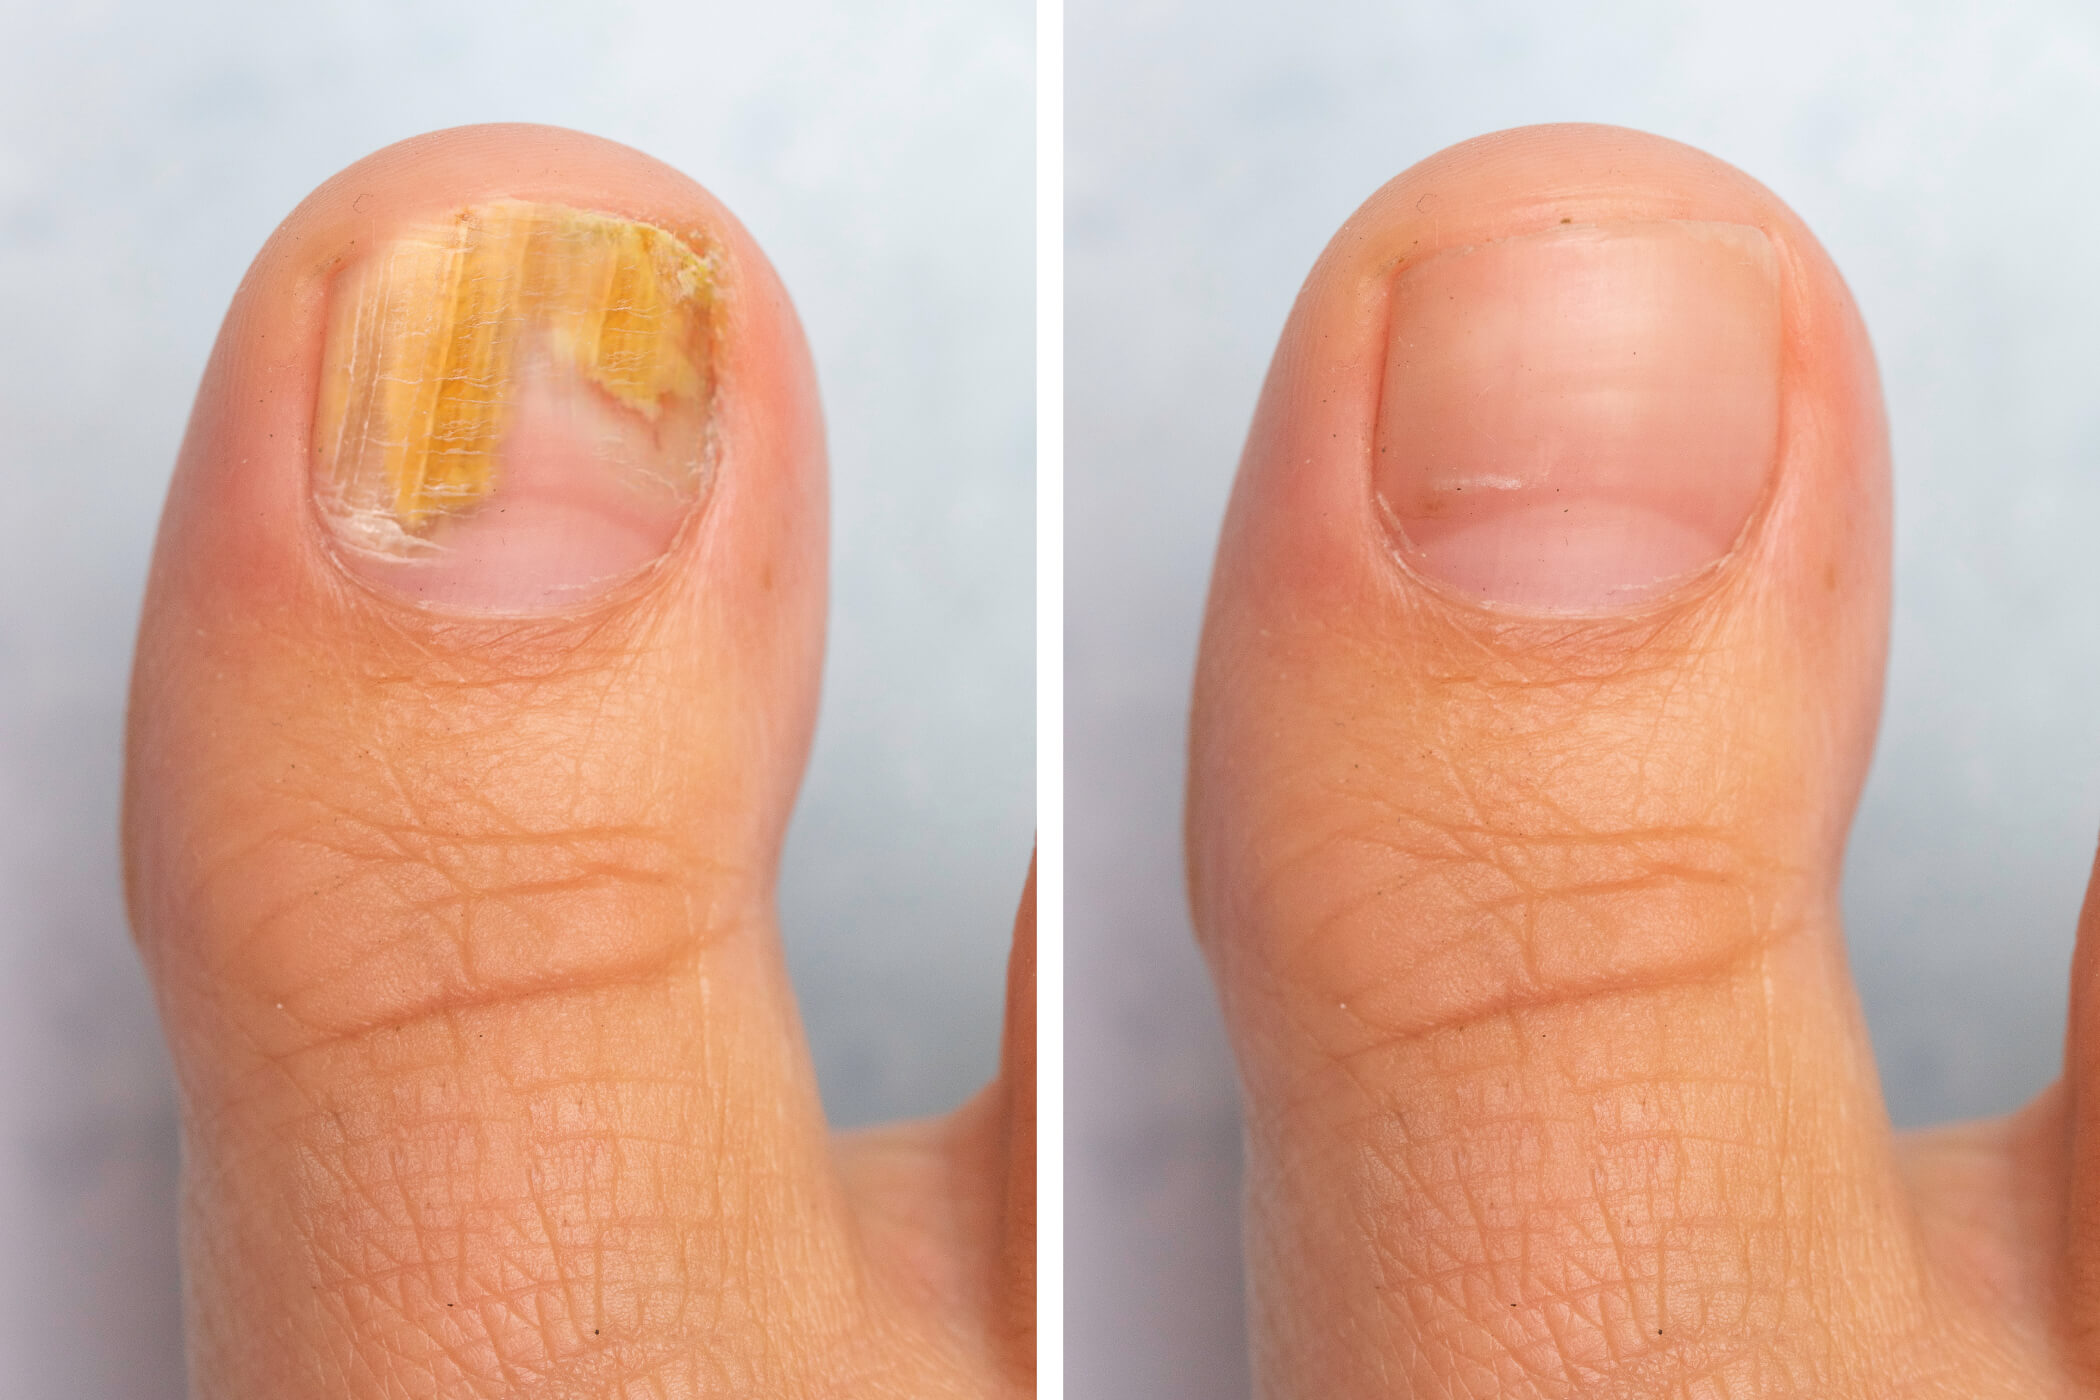 Cure Pain From Toenail Fungus Infection